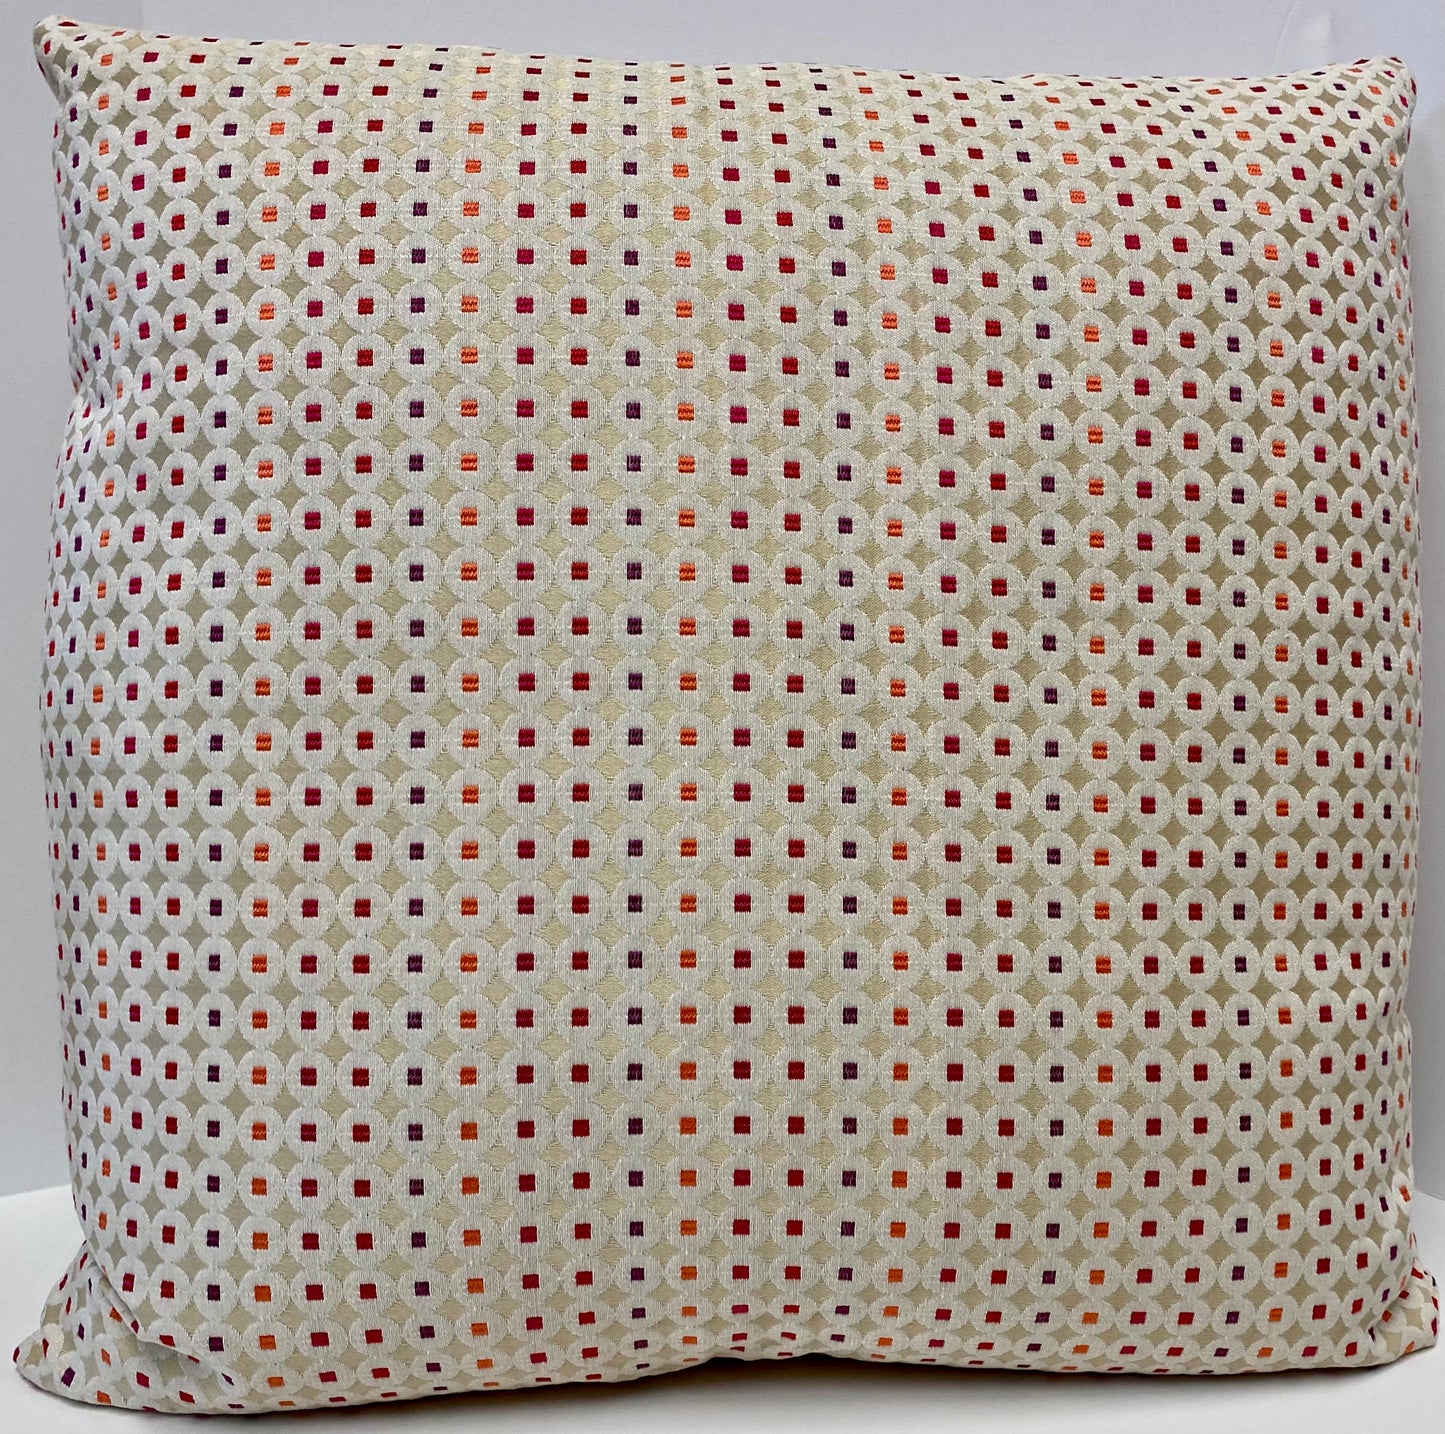 REDUCED TO CLEAR  Luxury Pillow -  24" x 24" - Dots of Fuchsia; Purple & Orange on a cream background